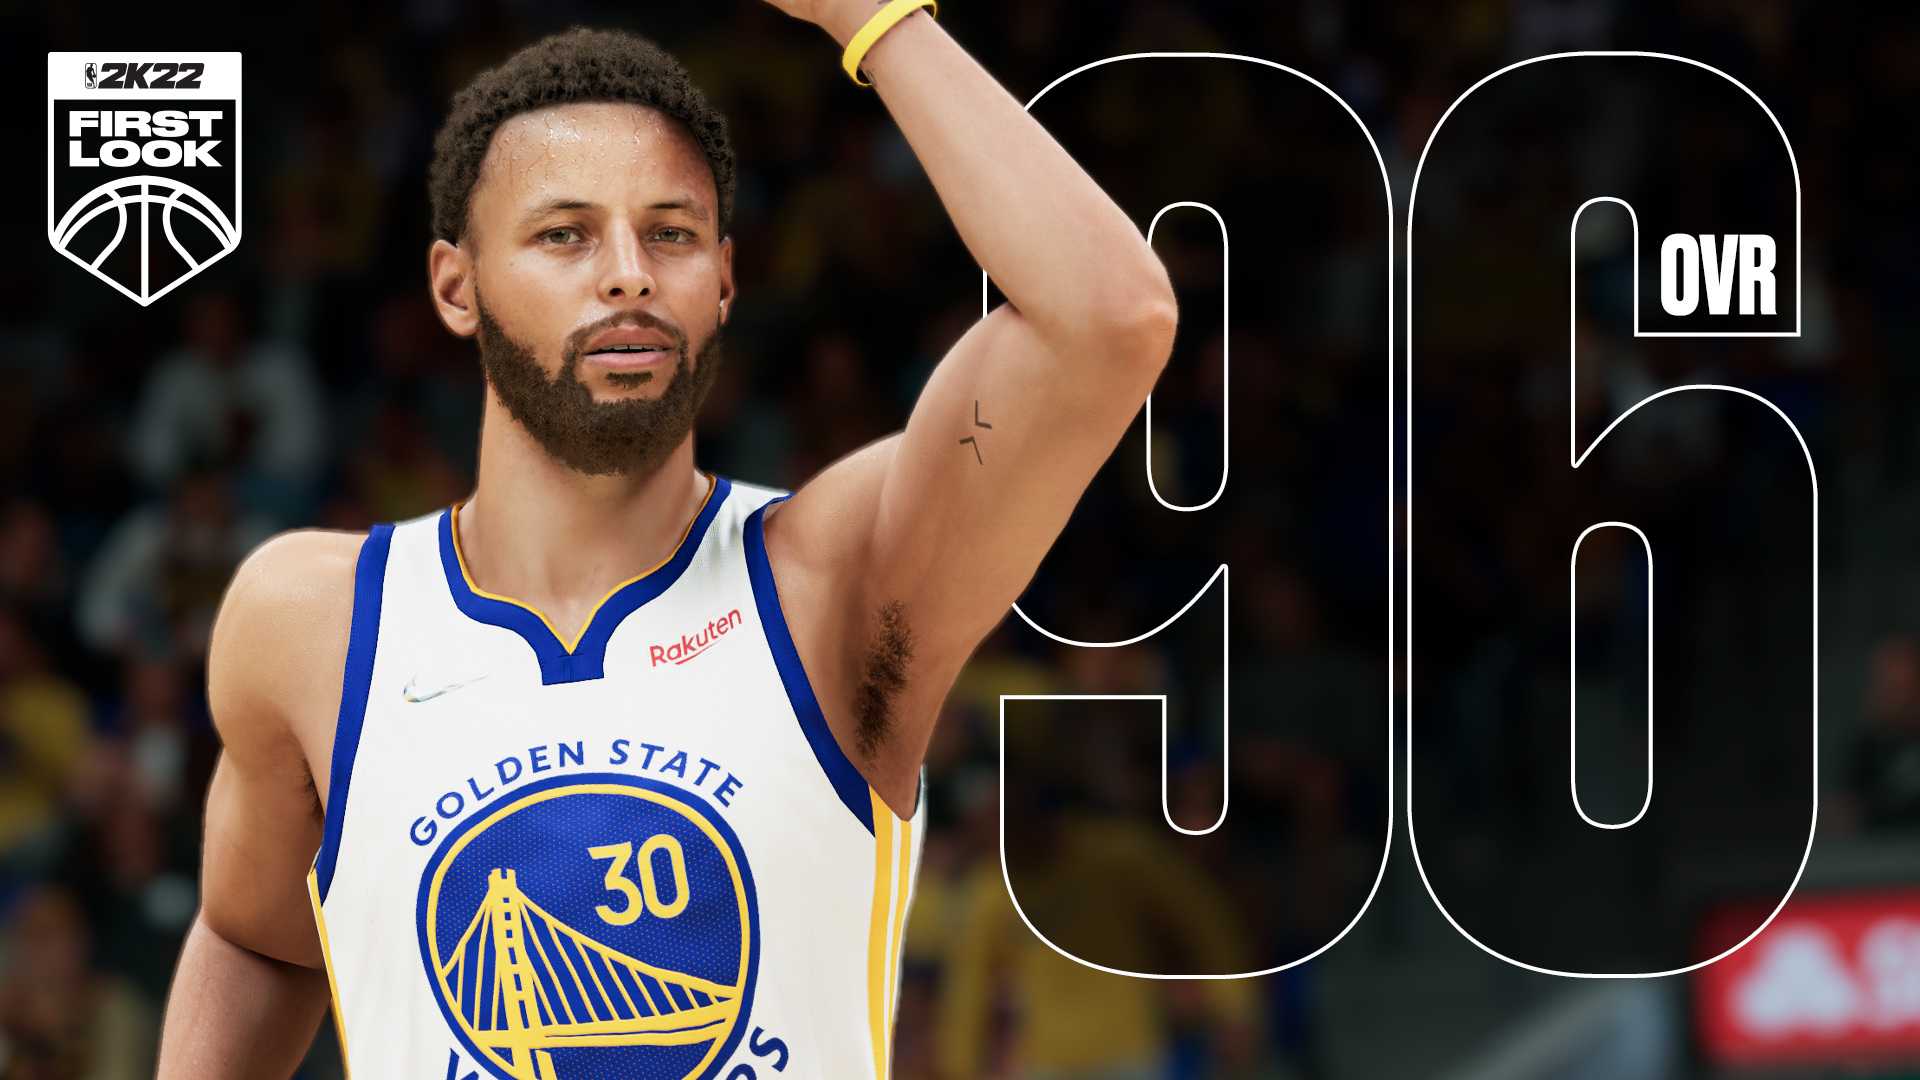 1920x10802019 Steph Curry NBA 2K22 1920x10802019 Resolution Wallpaper, HD  Games 4K Wallpapers, Images, Photos and Background - Wallpapers Den